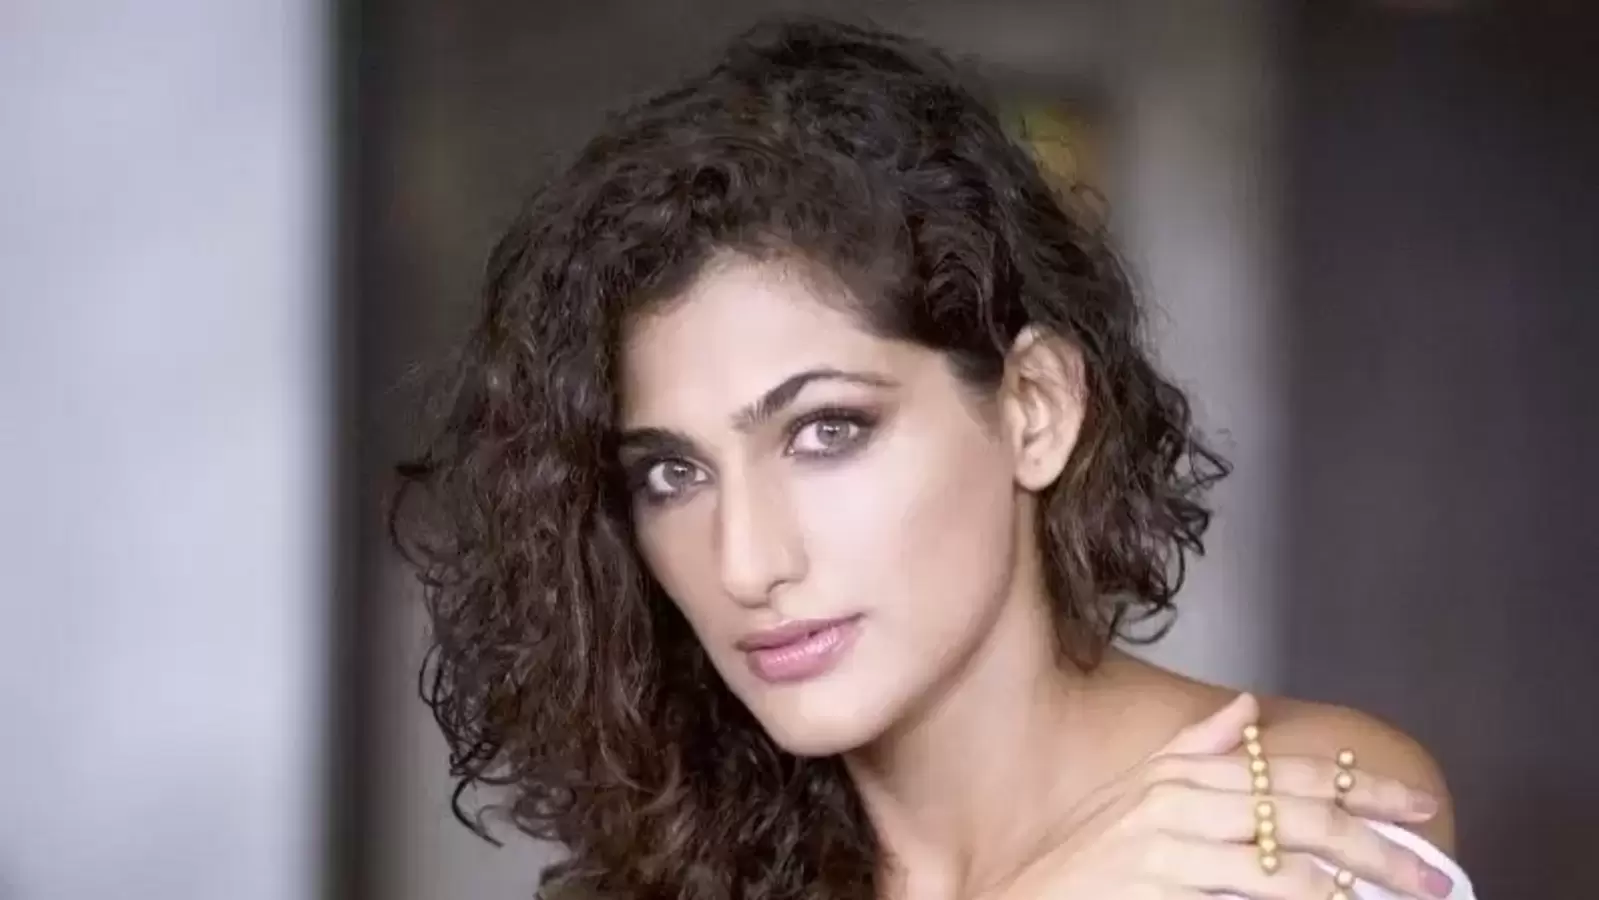 Kubbra Sait recalls being bullied and called ‘Cobra’ in school: ‘I was called Medusa because of my hair’